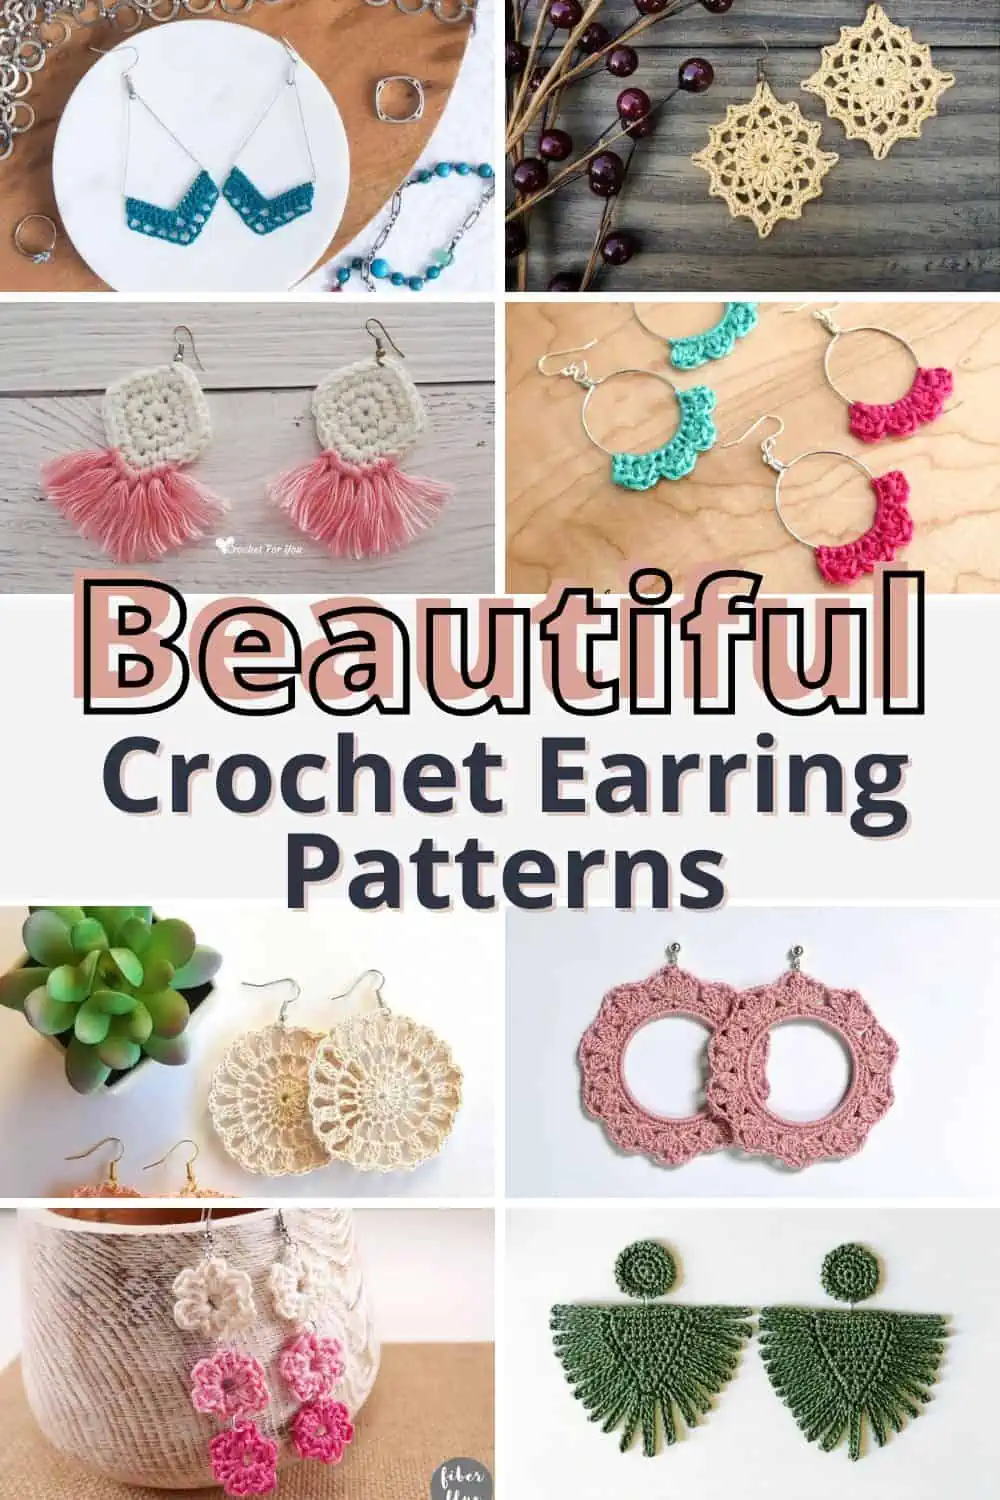 collage image of different crochet earrings with text overlay reading "beautiful crochet earrings"